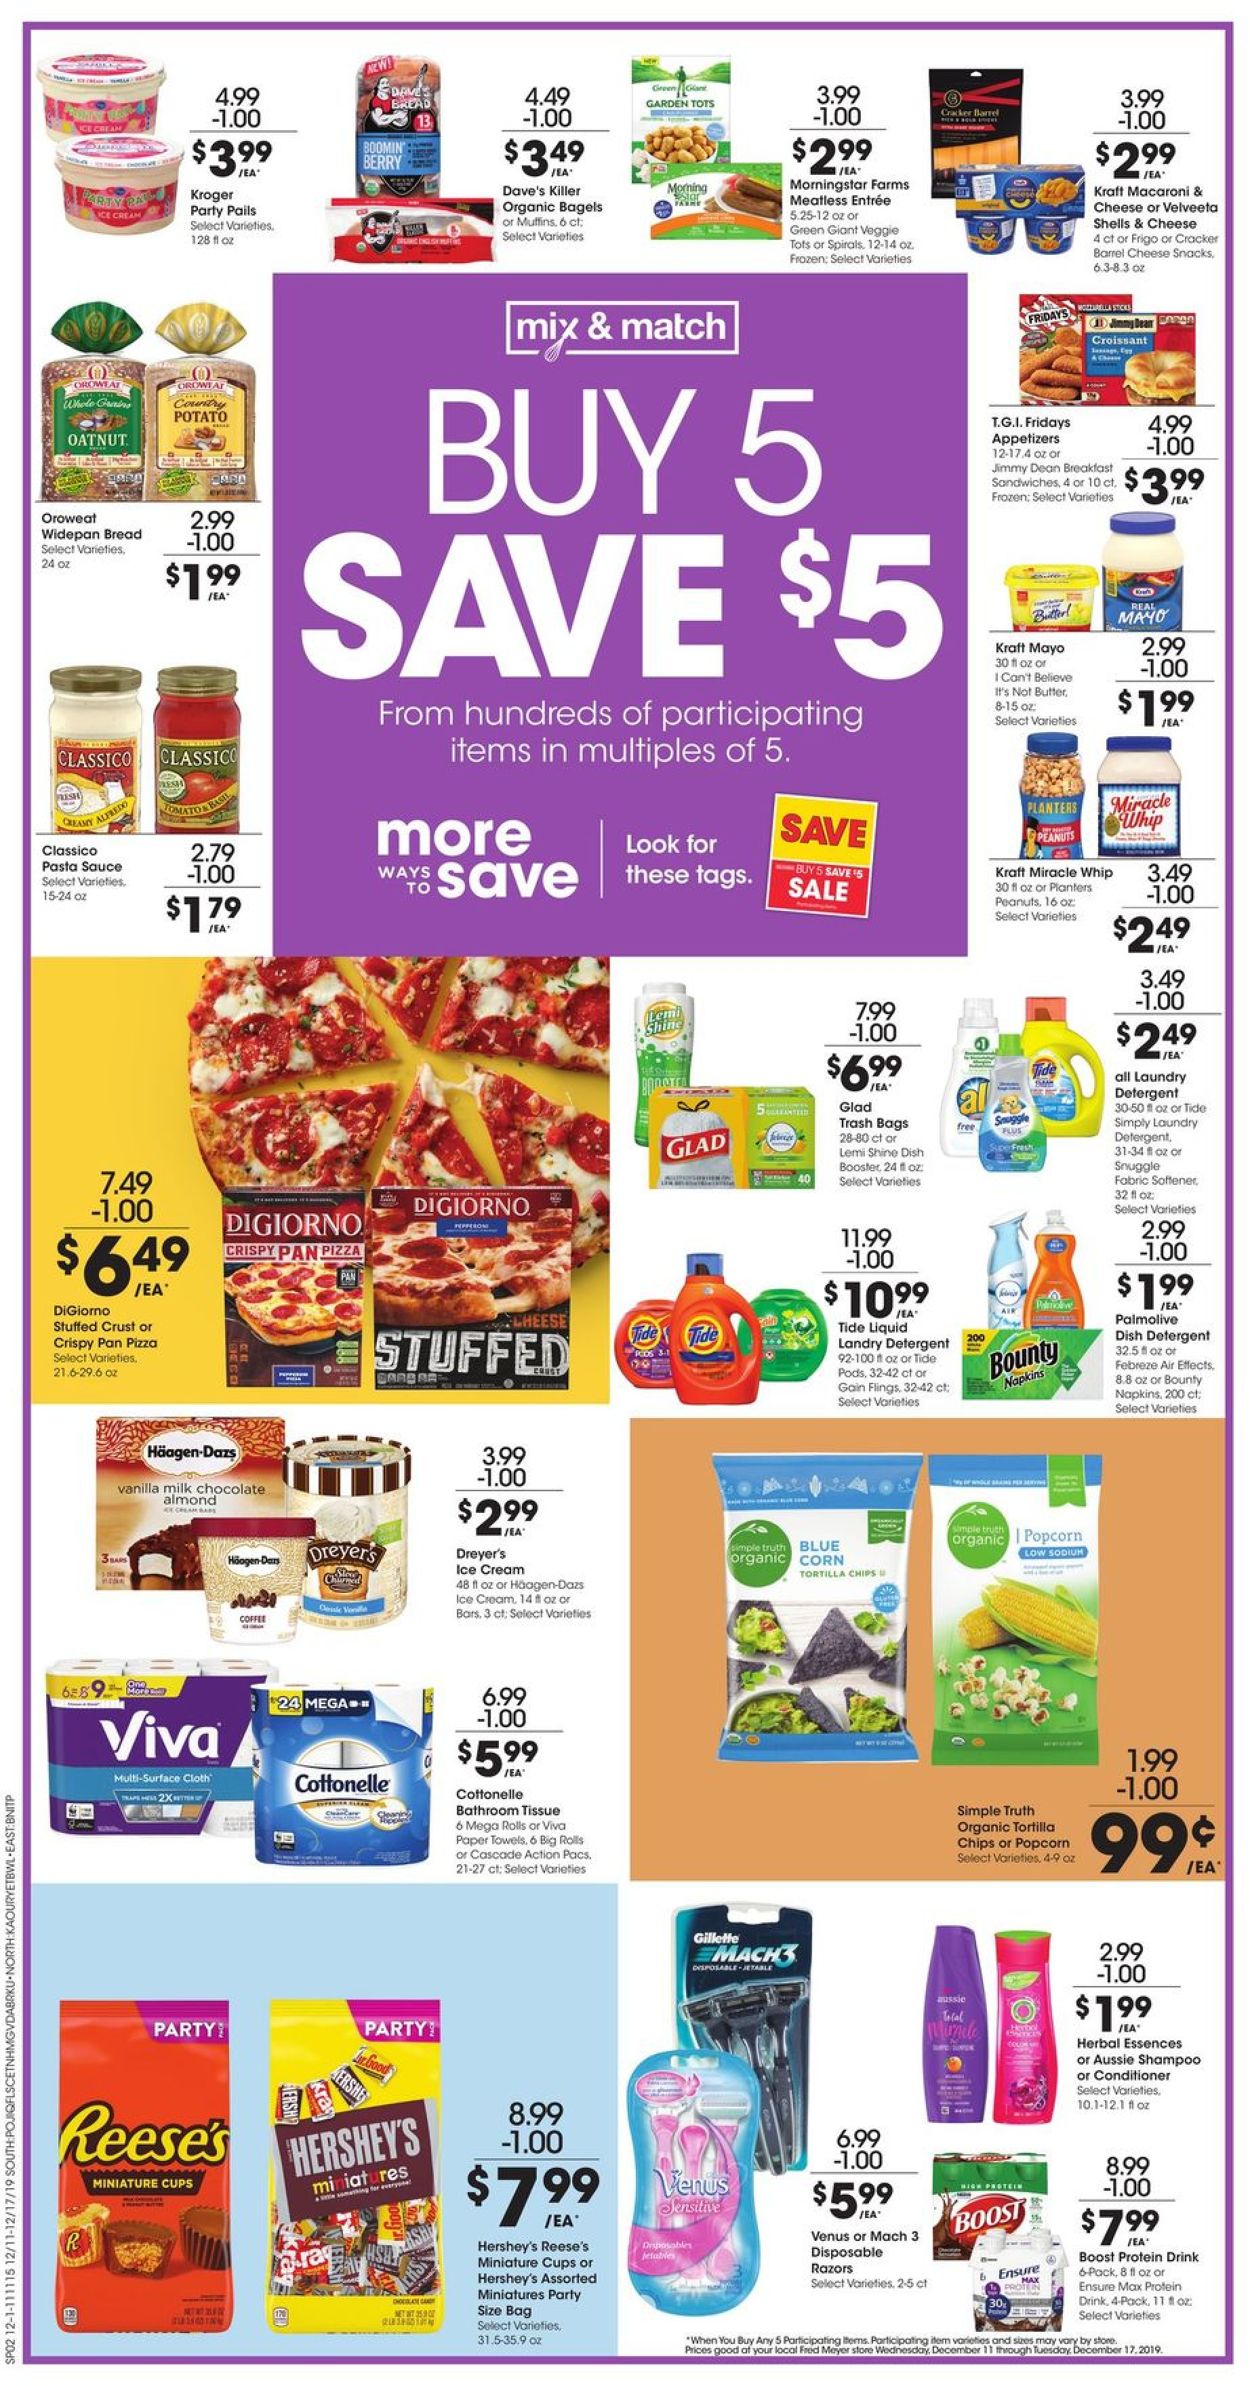 Fred Meyer Weekly Ad Circular - valid 12/11-12/17/2019 (Page 3)